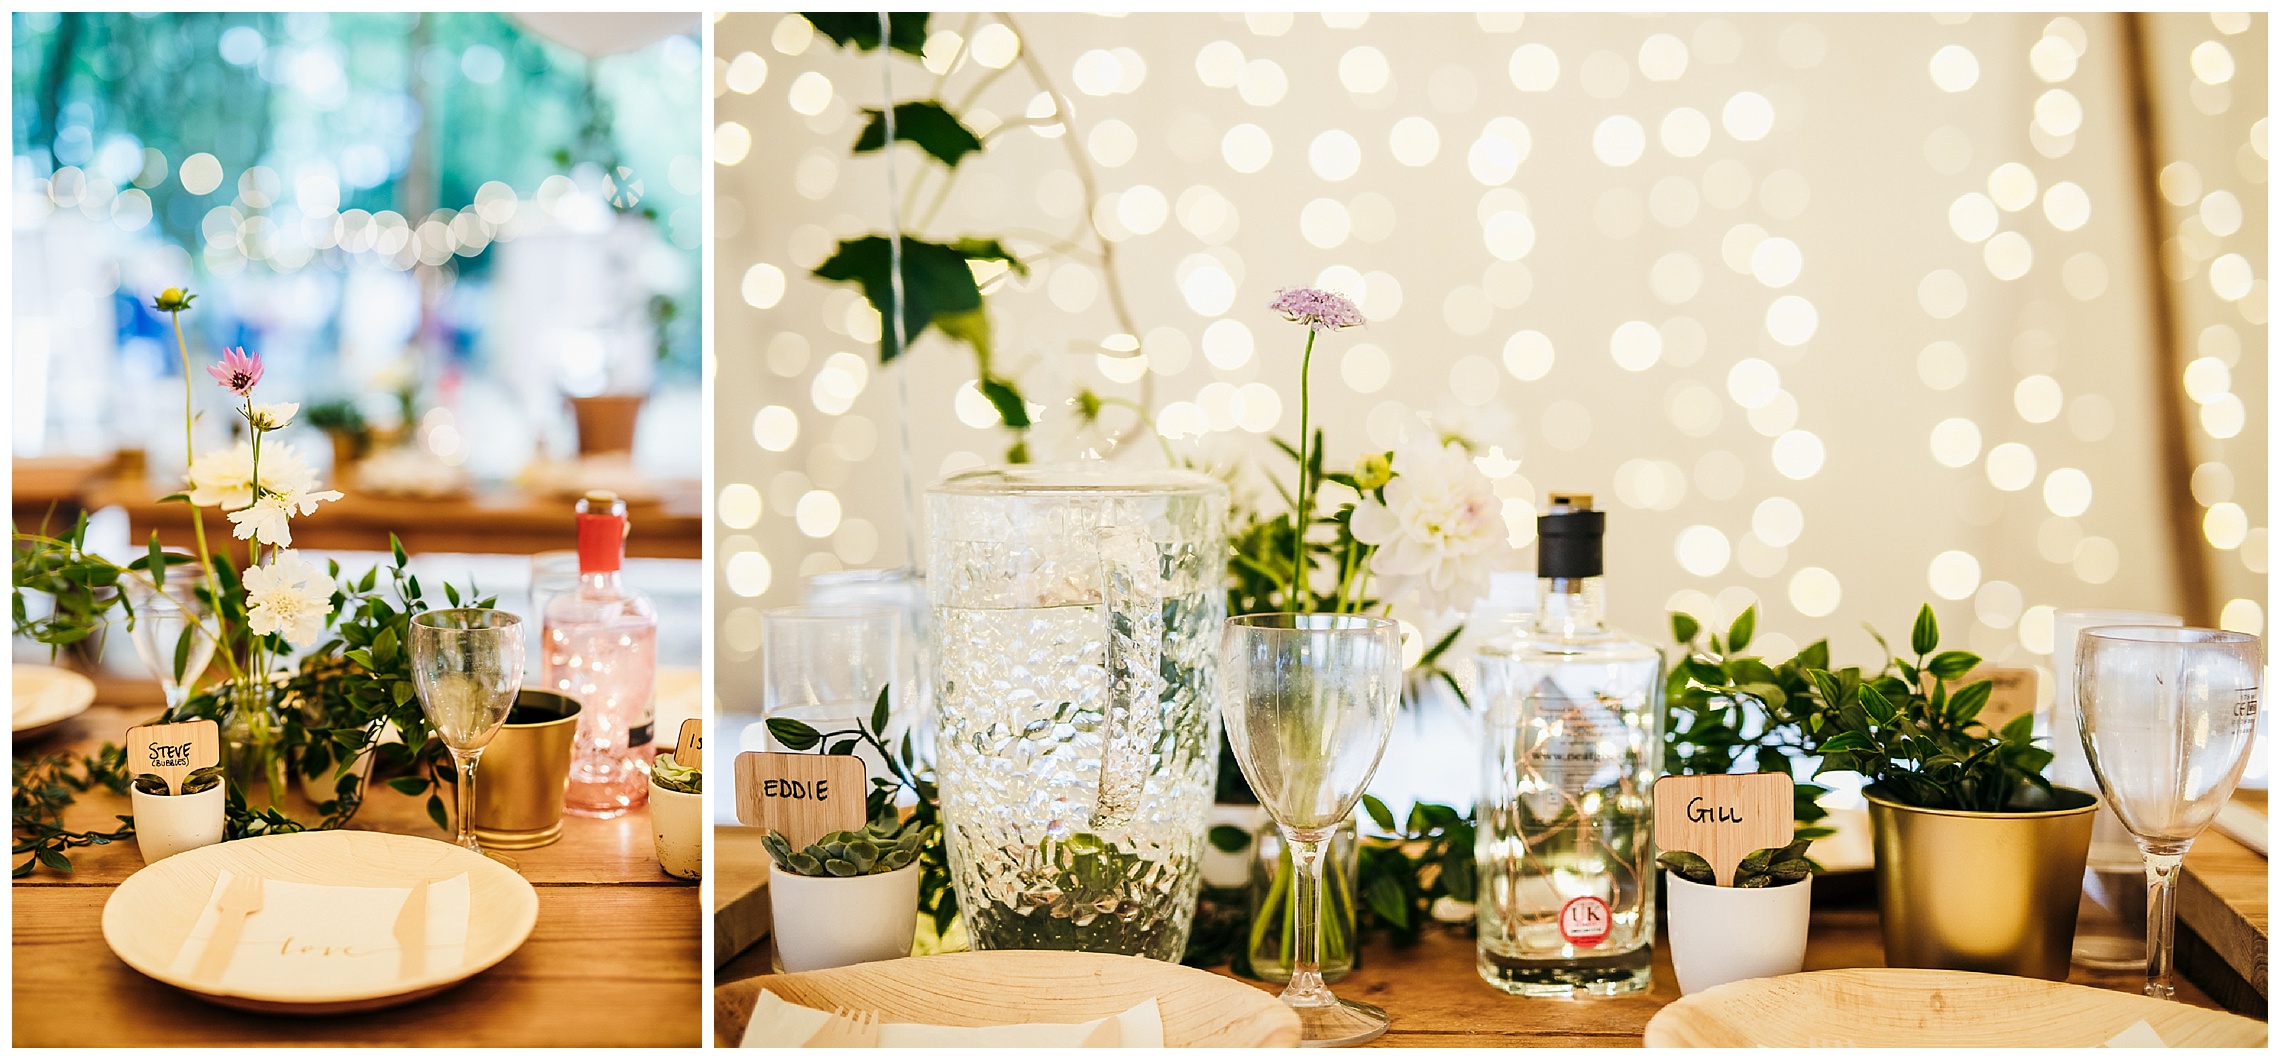 fairy lights and wedding details of english flowers, gin bottles and succulents